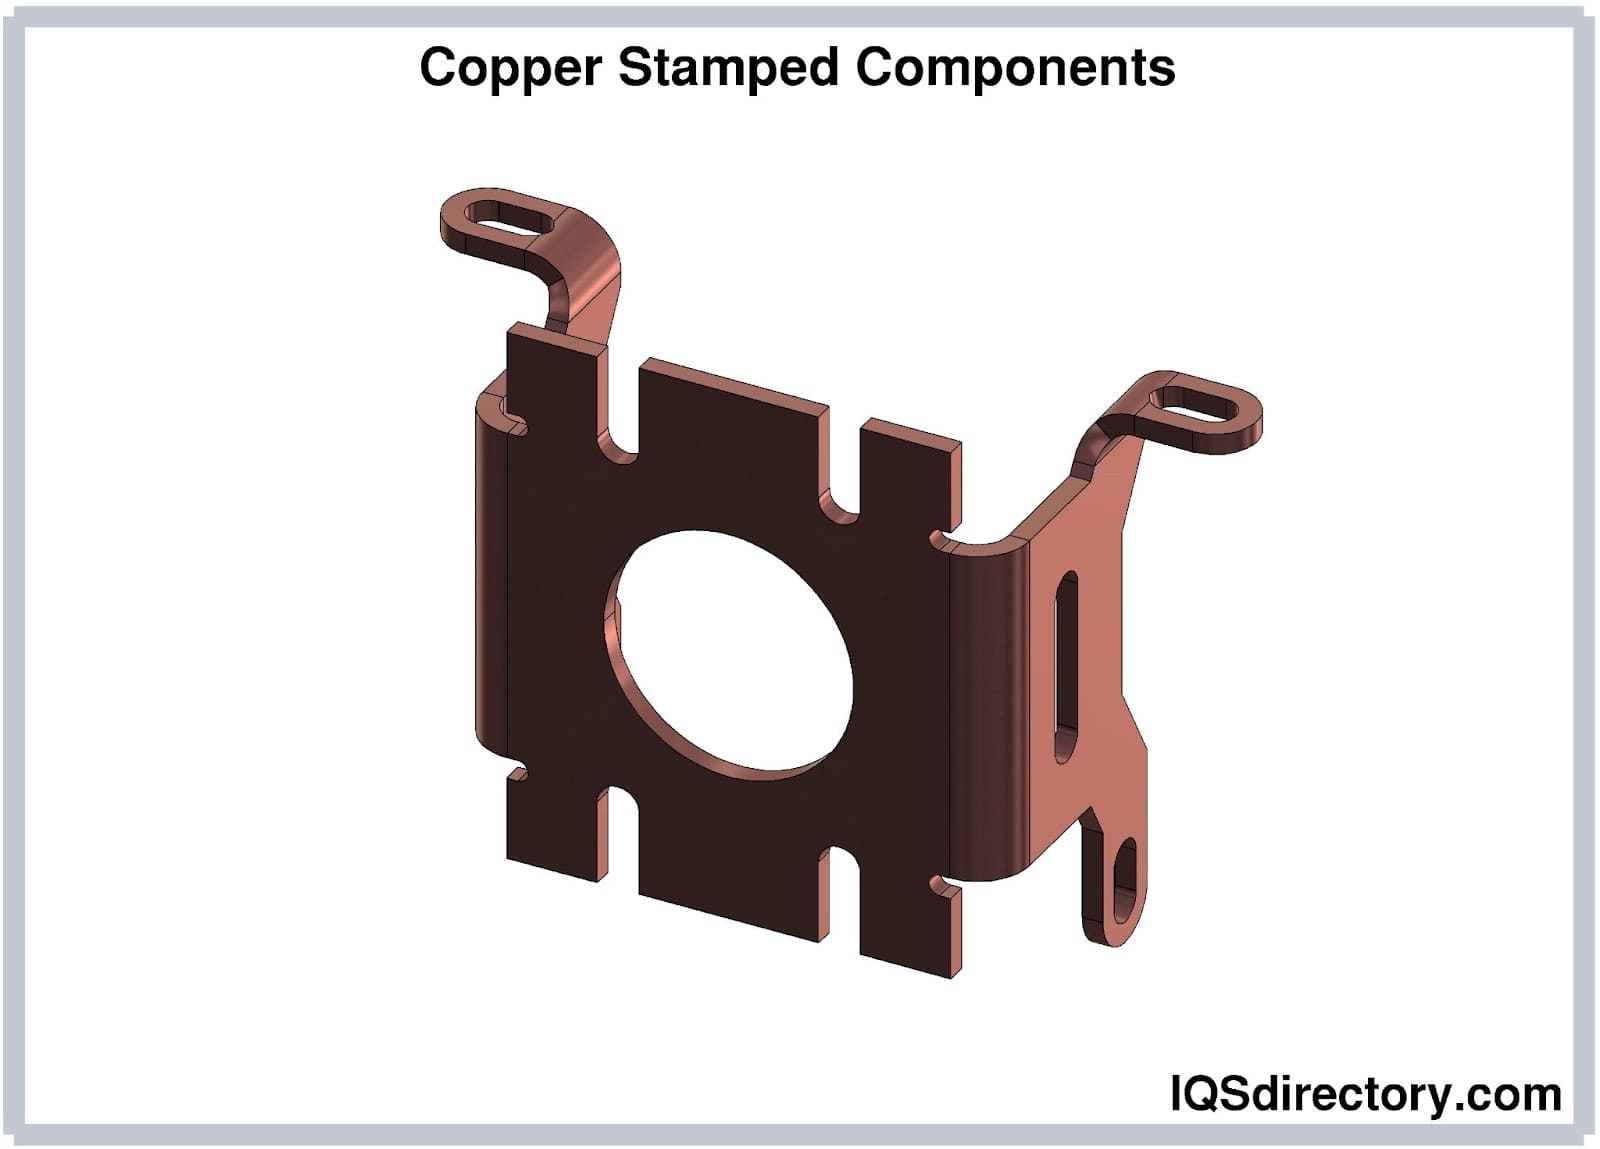 Copper Stamped Components